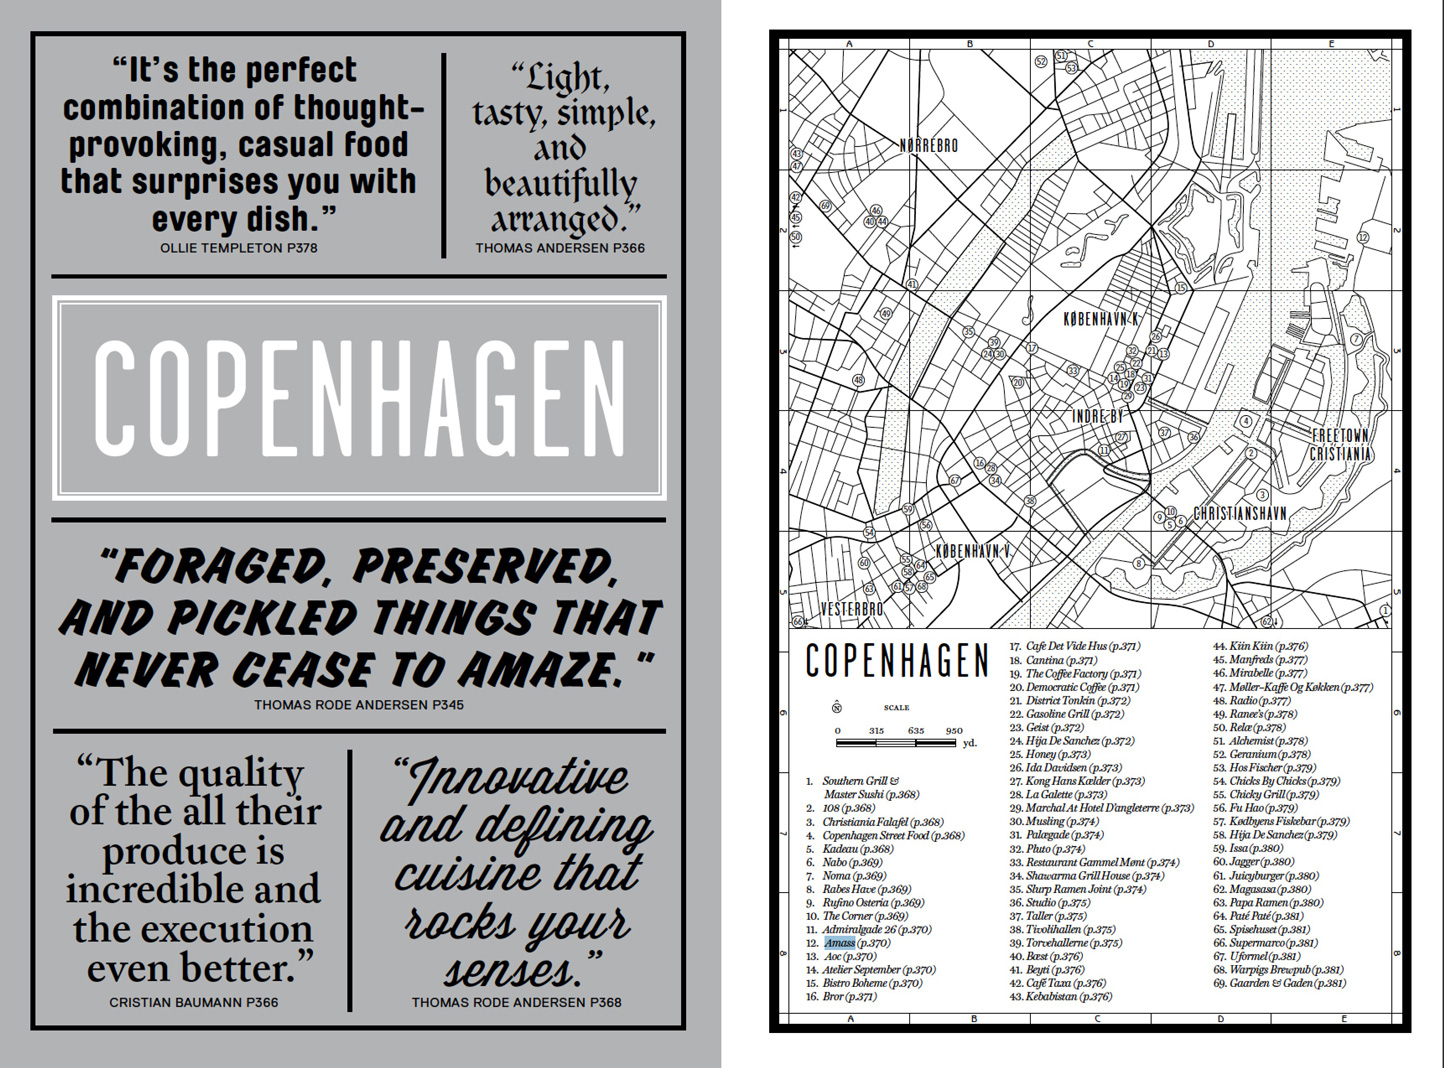 The Copenhagen introduction from our new book Where Chefs Eat